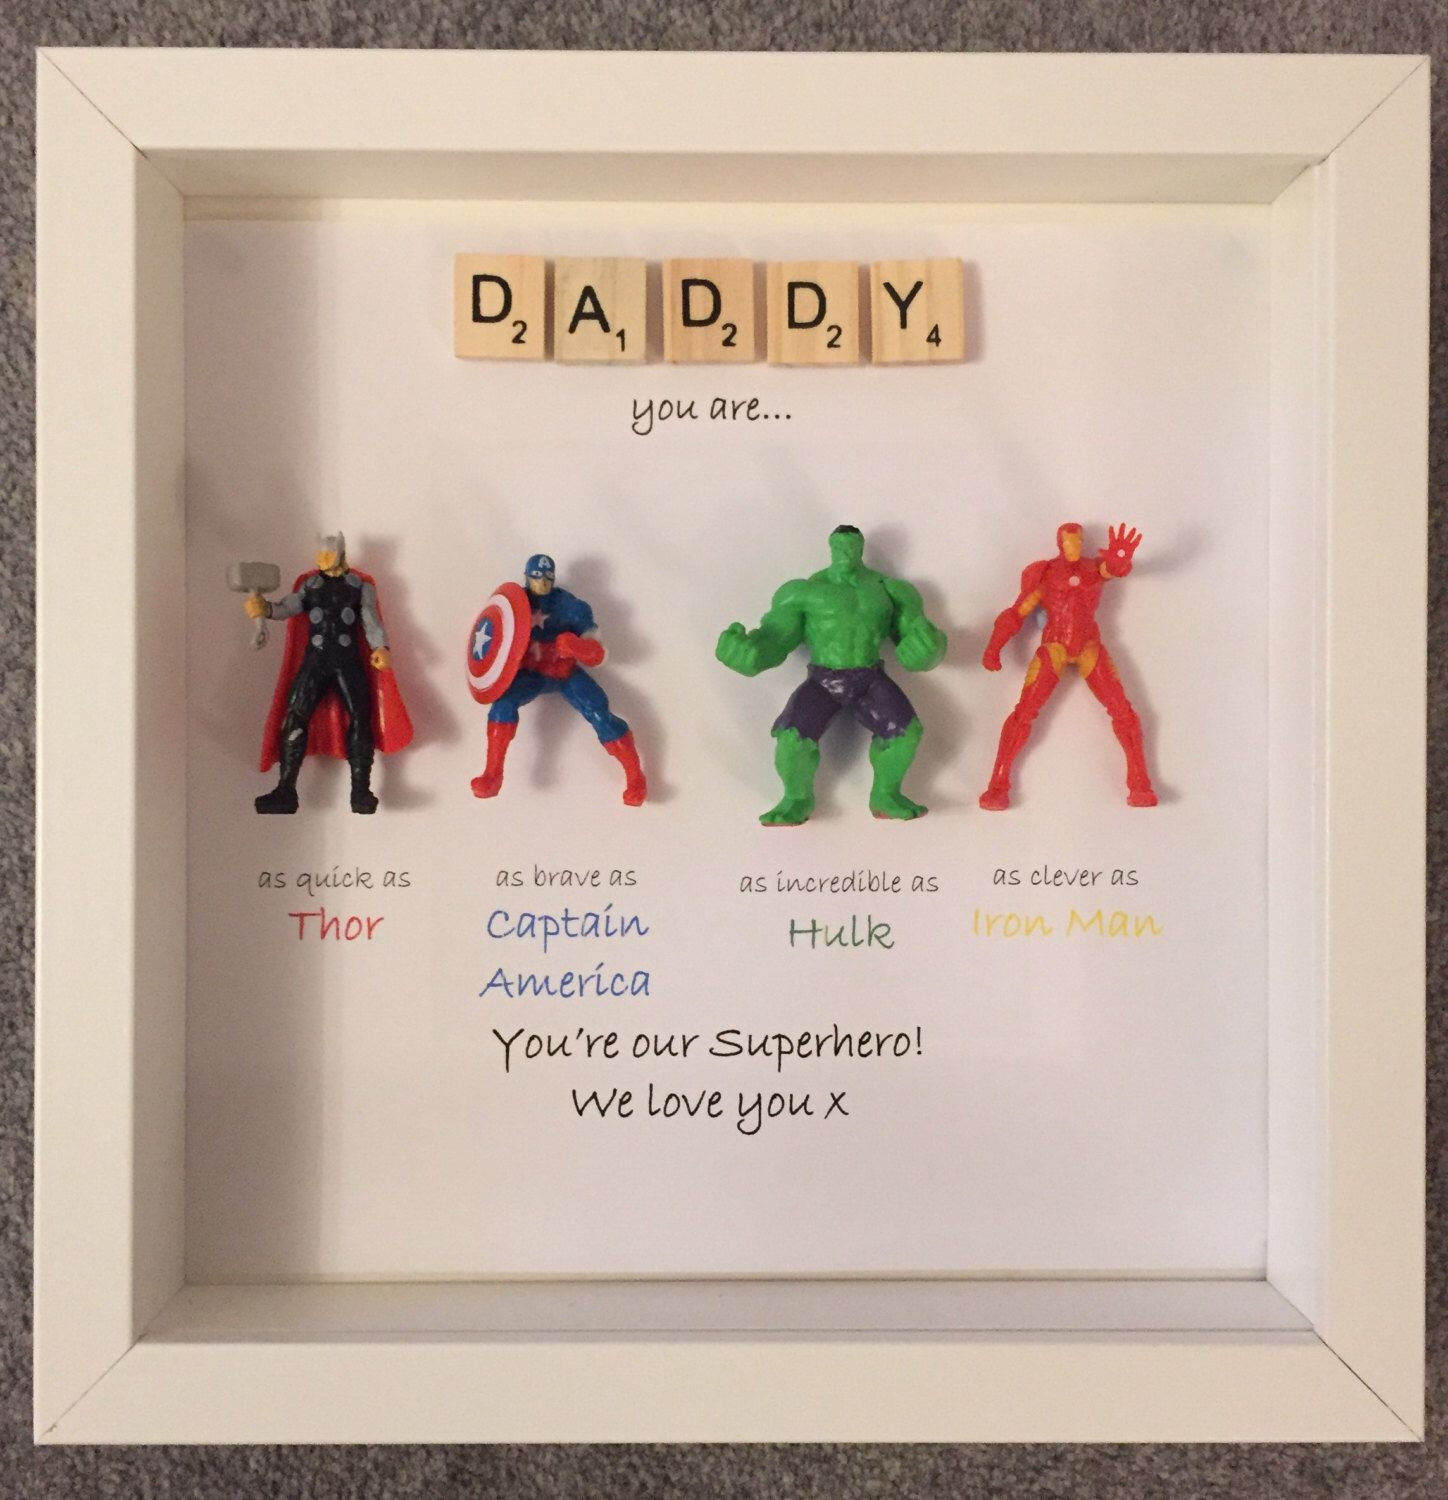 Dad Birthday Gift
 Avengers Superhero figures frame t Ideal for dad